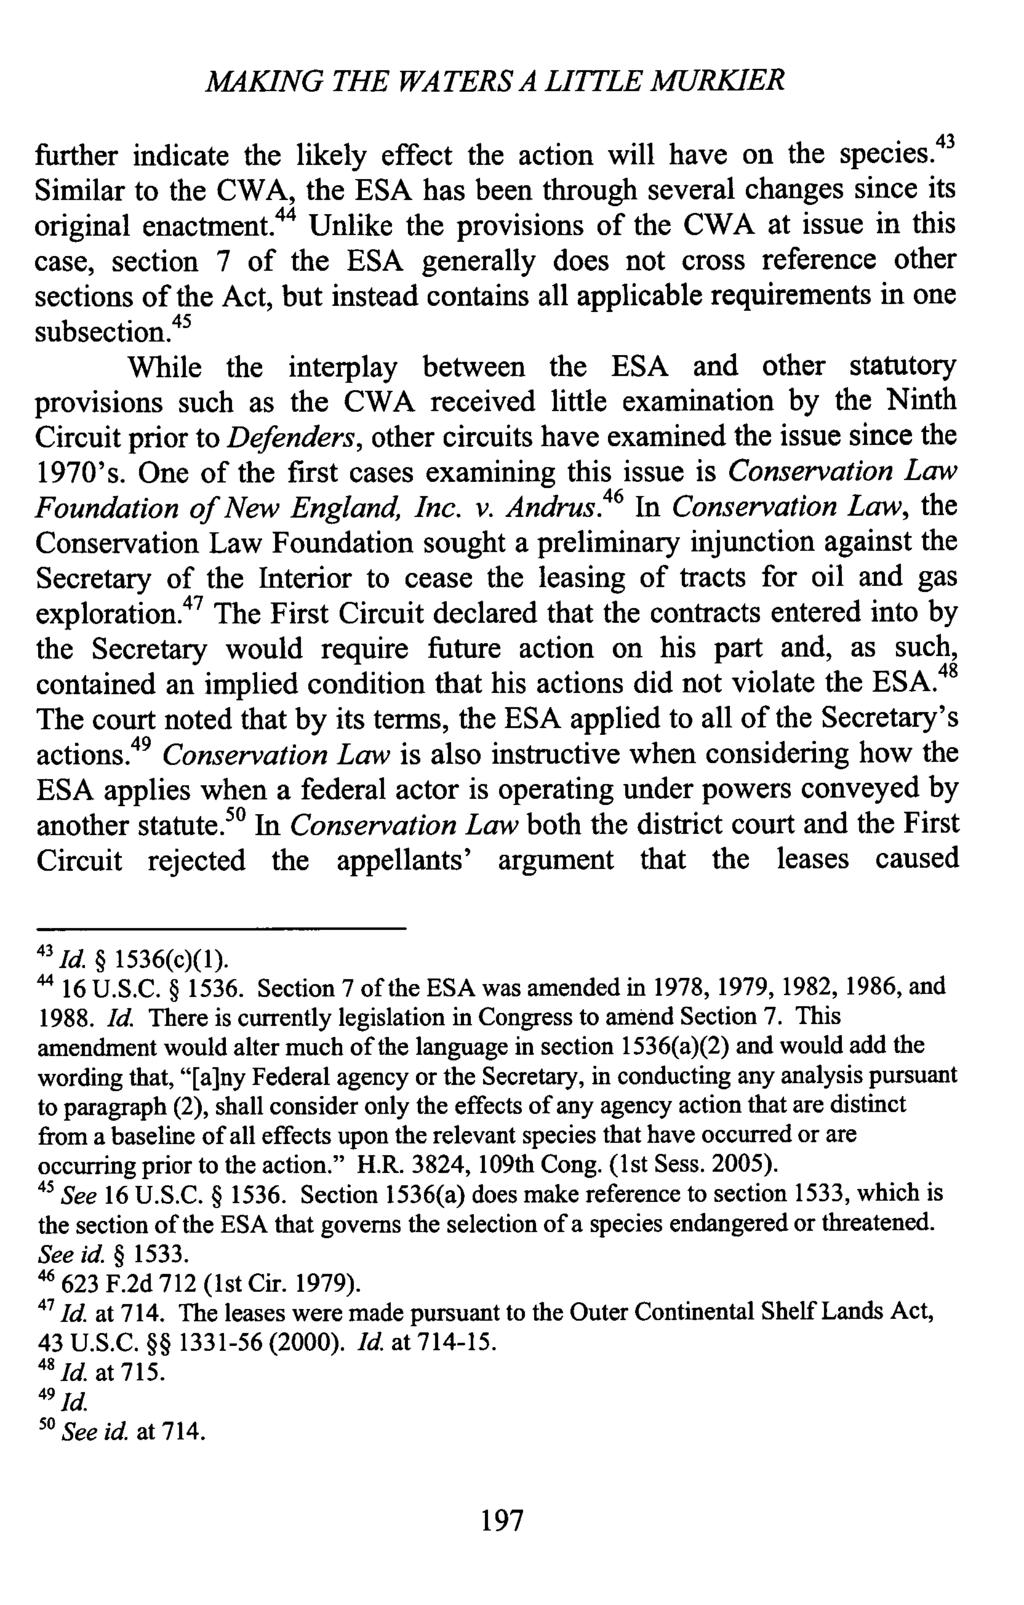 MAKING THE WATERS A LITTLE MURKIER further indicate the likely effect the action will have on the species.43 Similar to the CWA, the ESA has been through several changes since its original enactment.